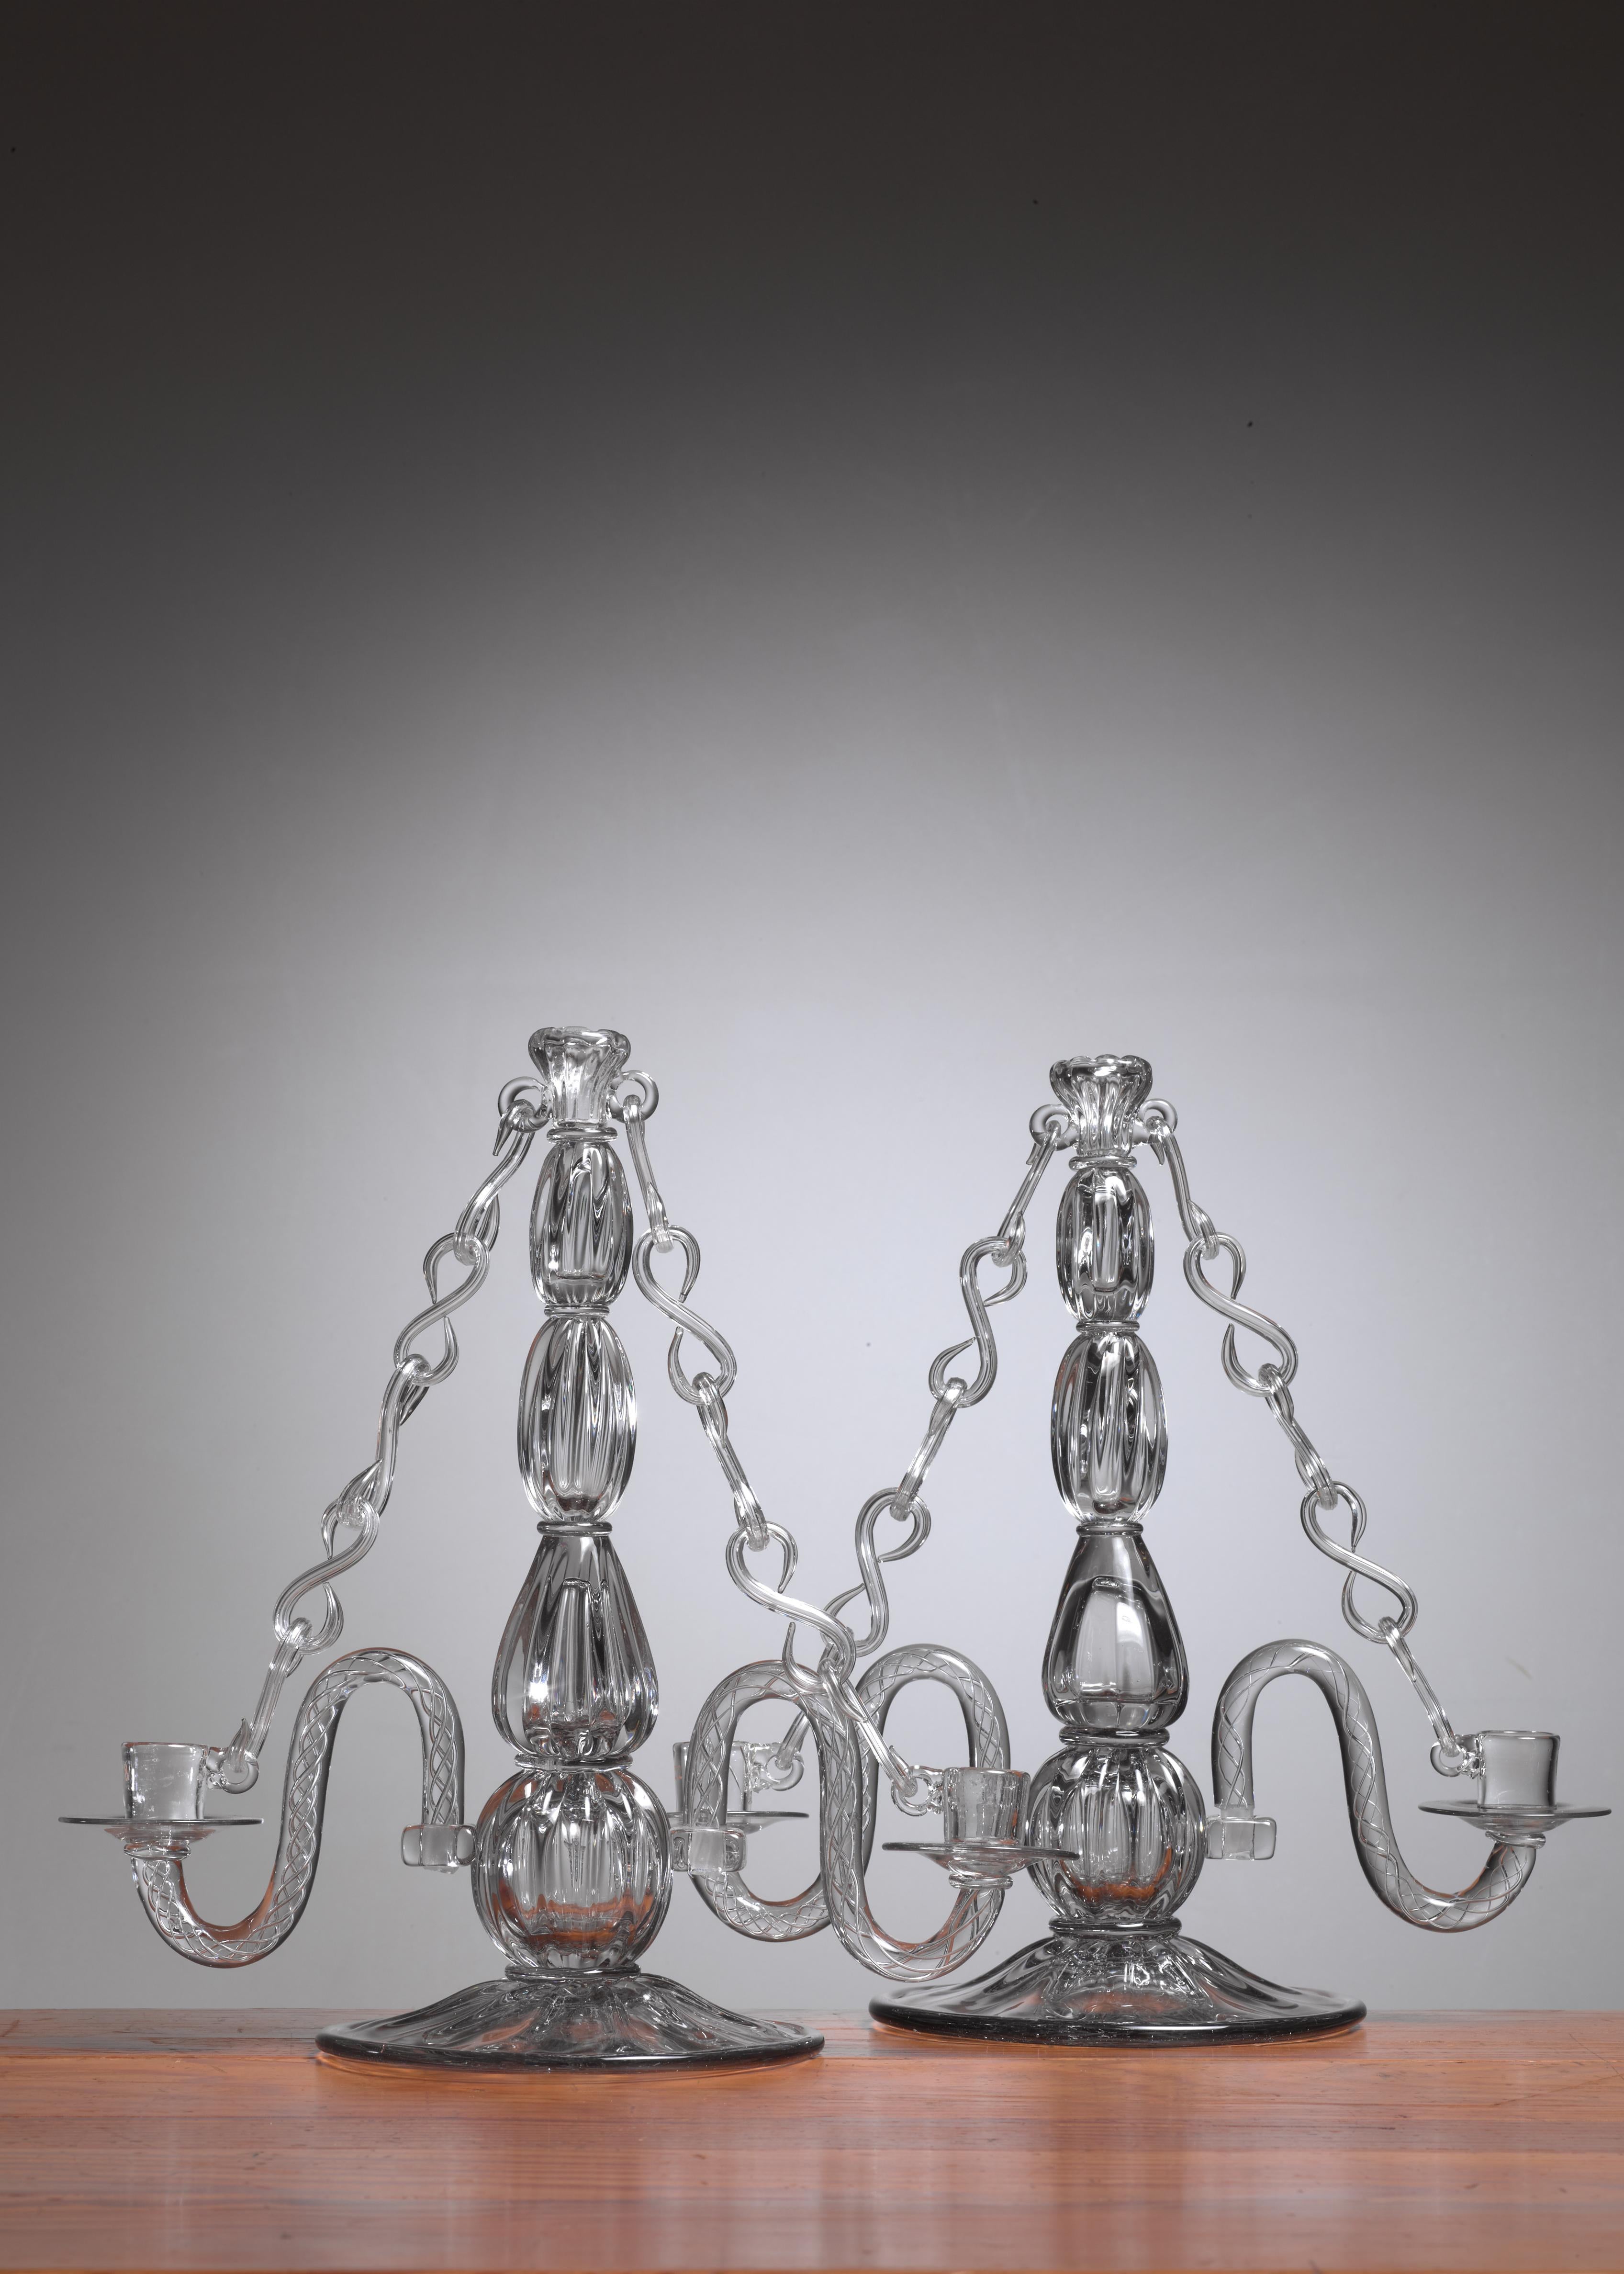 A pair of glass candelabra, designed by Gerda Stromberg and executed by Masterblower Knut Bergqvist for Strömbergshyttan Glassworks in 1941. The candelabra can hold three candles, one on top and two in the lower cups. The lower cups with their